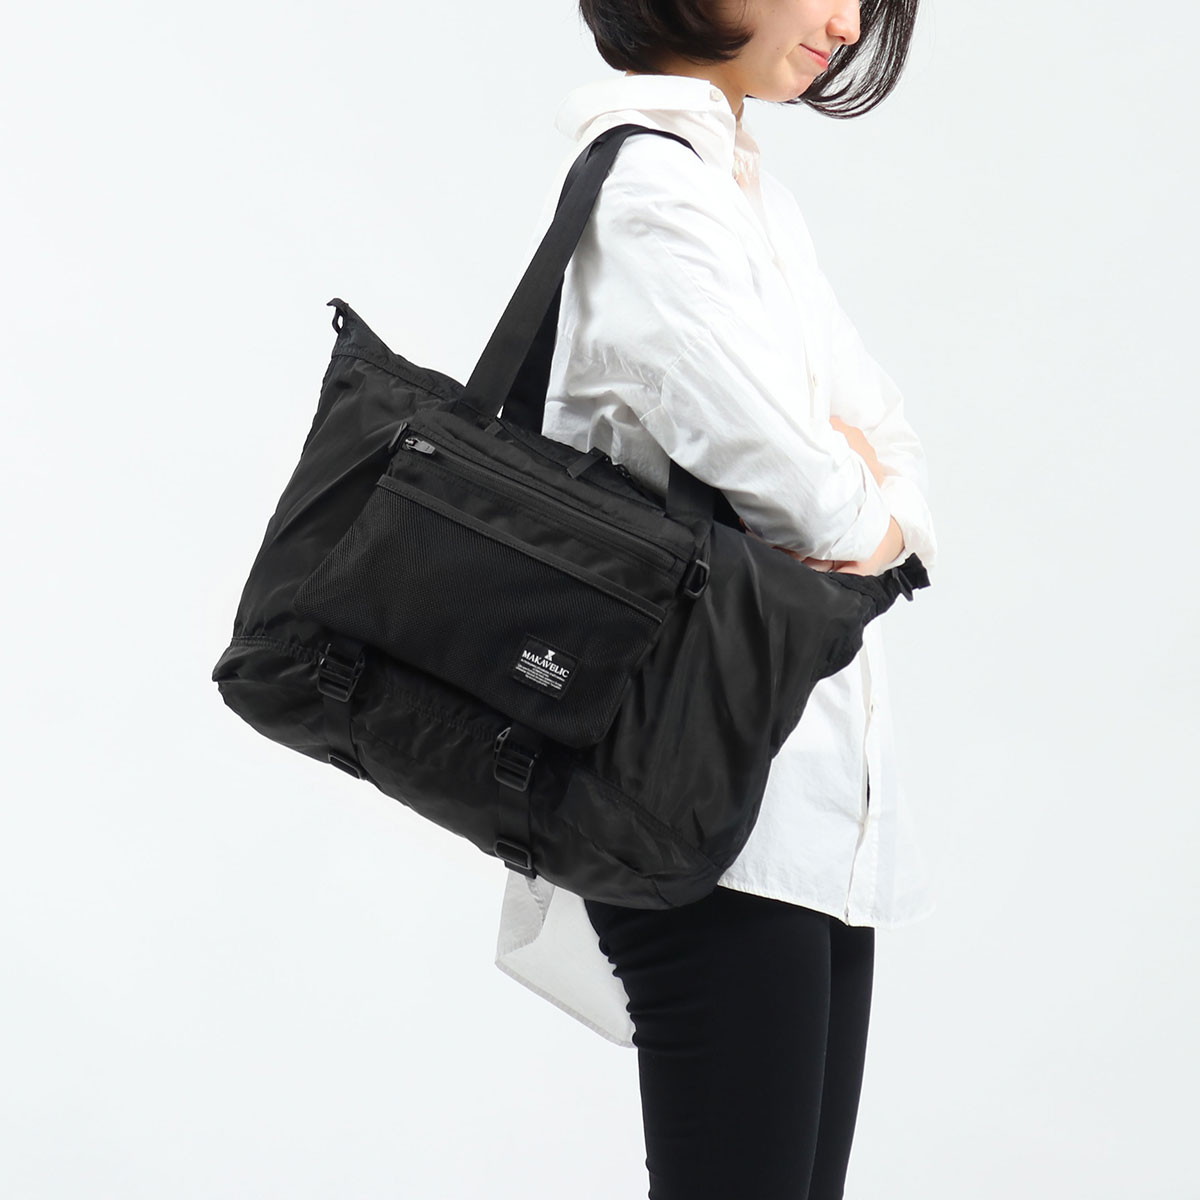 MAKAVELIC マキャベリック PACKABLE TOTE 3121-10202